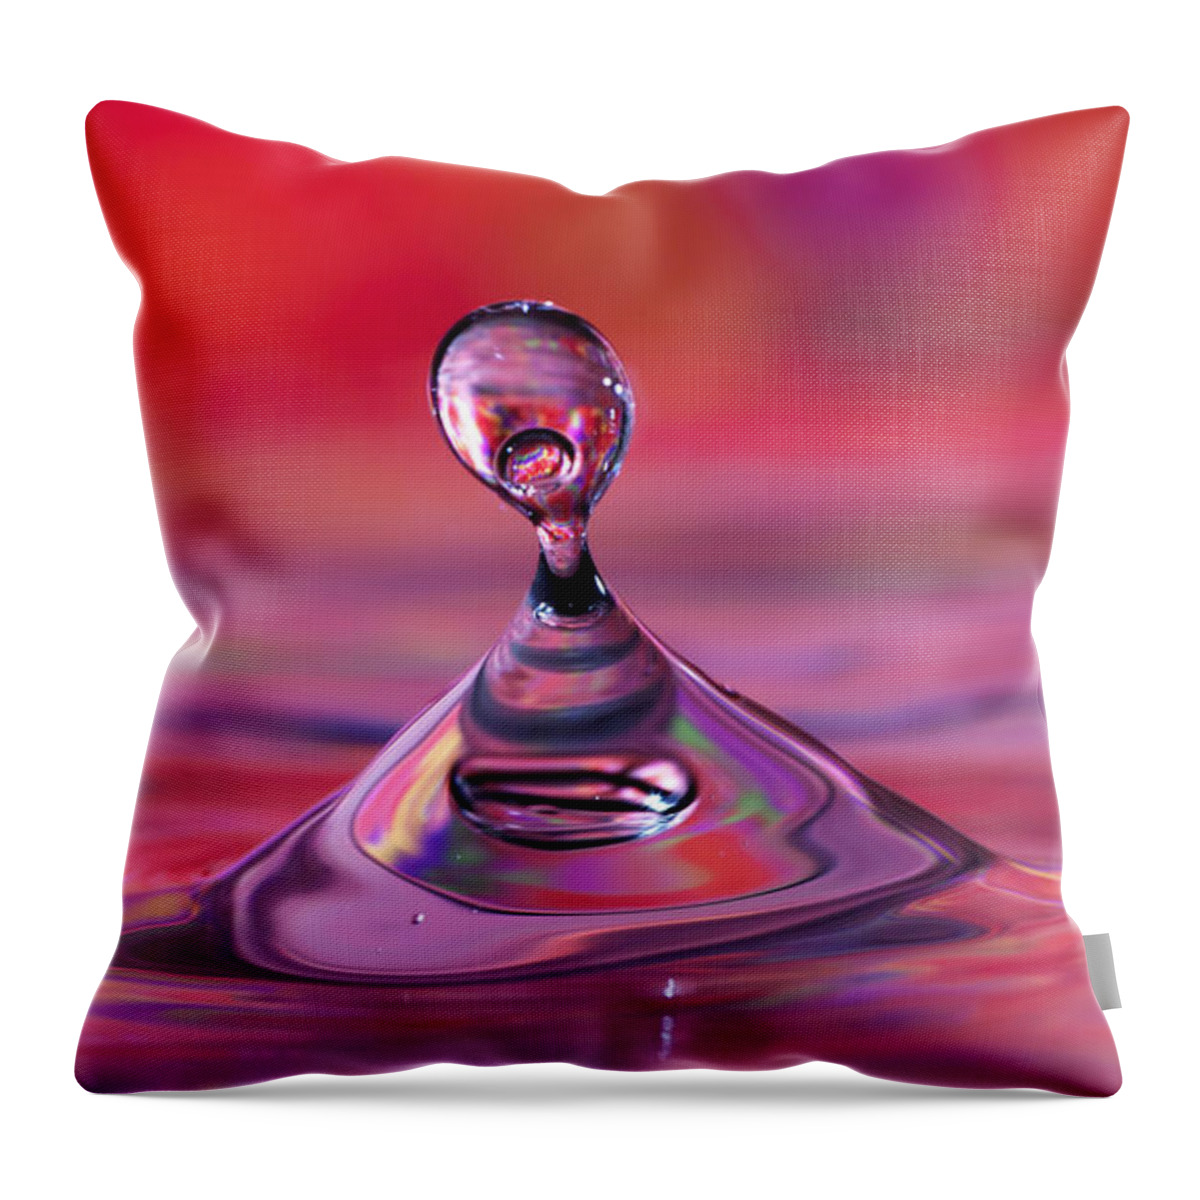 Abstract Throw Pillow featuring the photograph Bloop by Darren Fisher